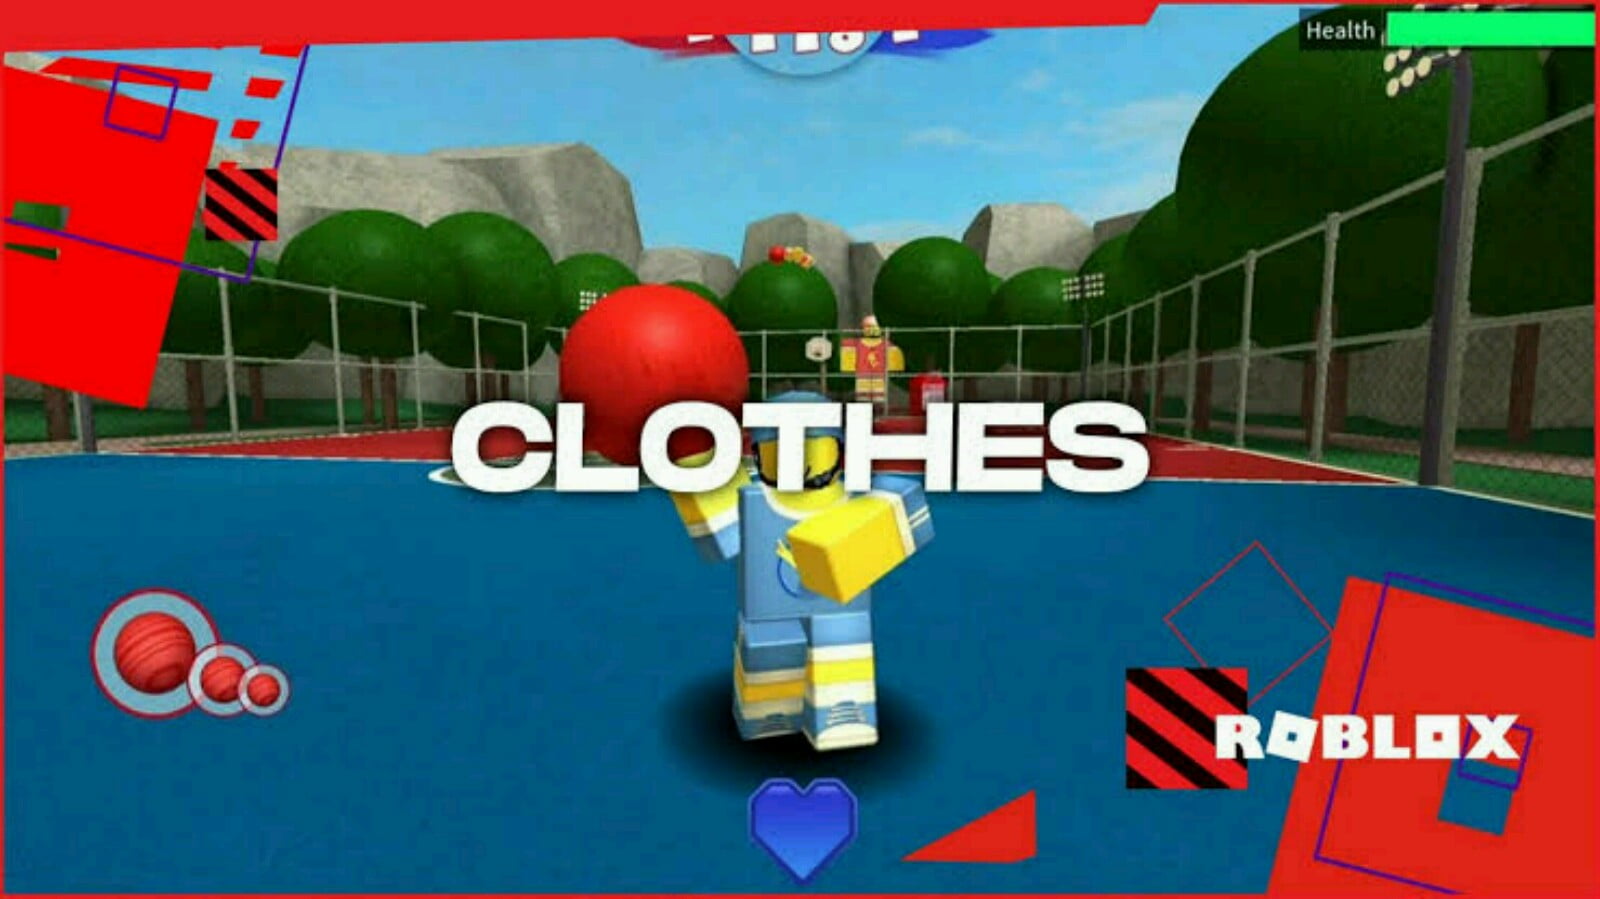 How To Make Clothes On Roblox 100 Working - how to make clothes on roblox